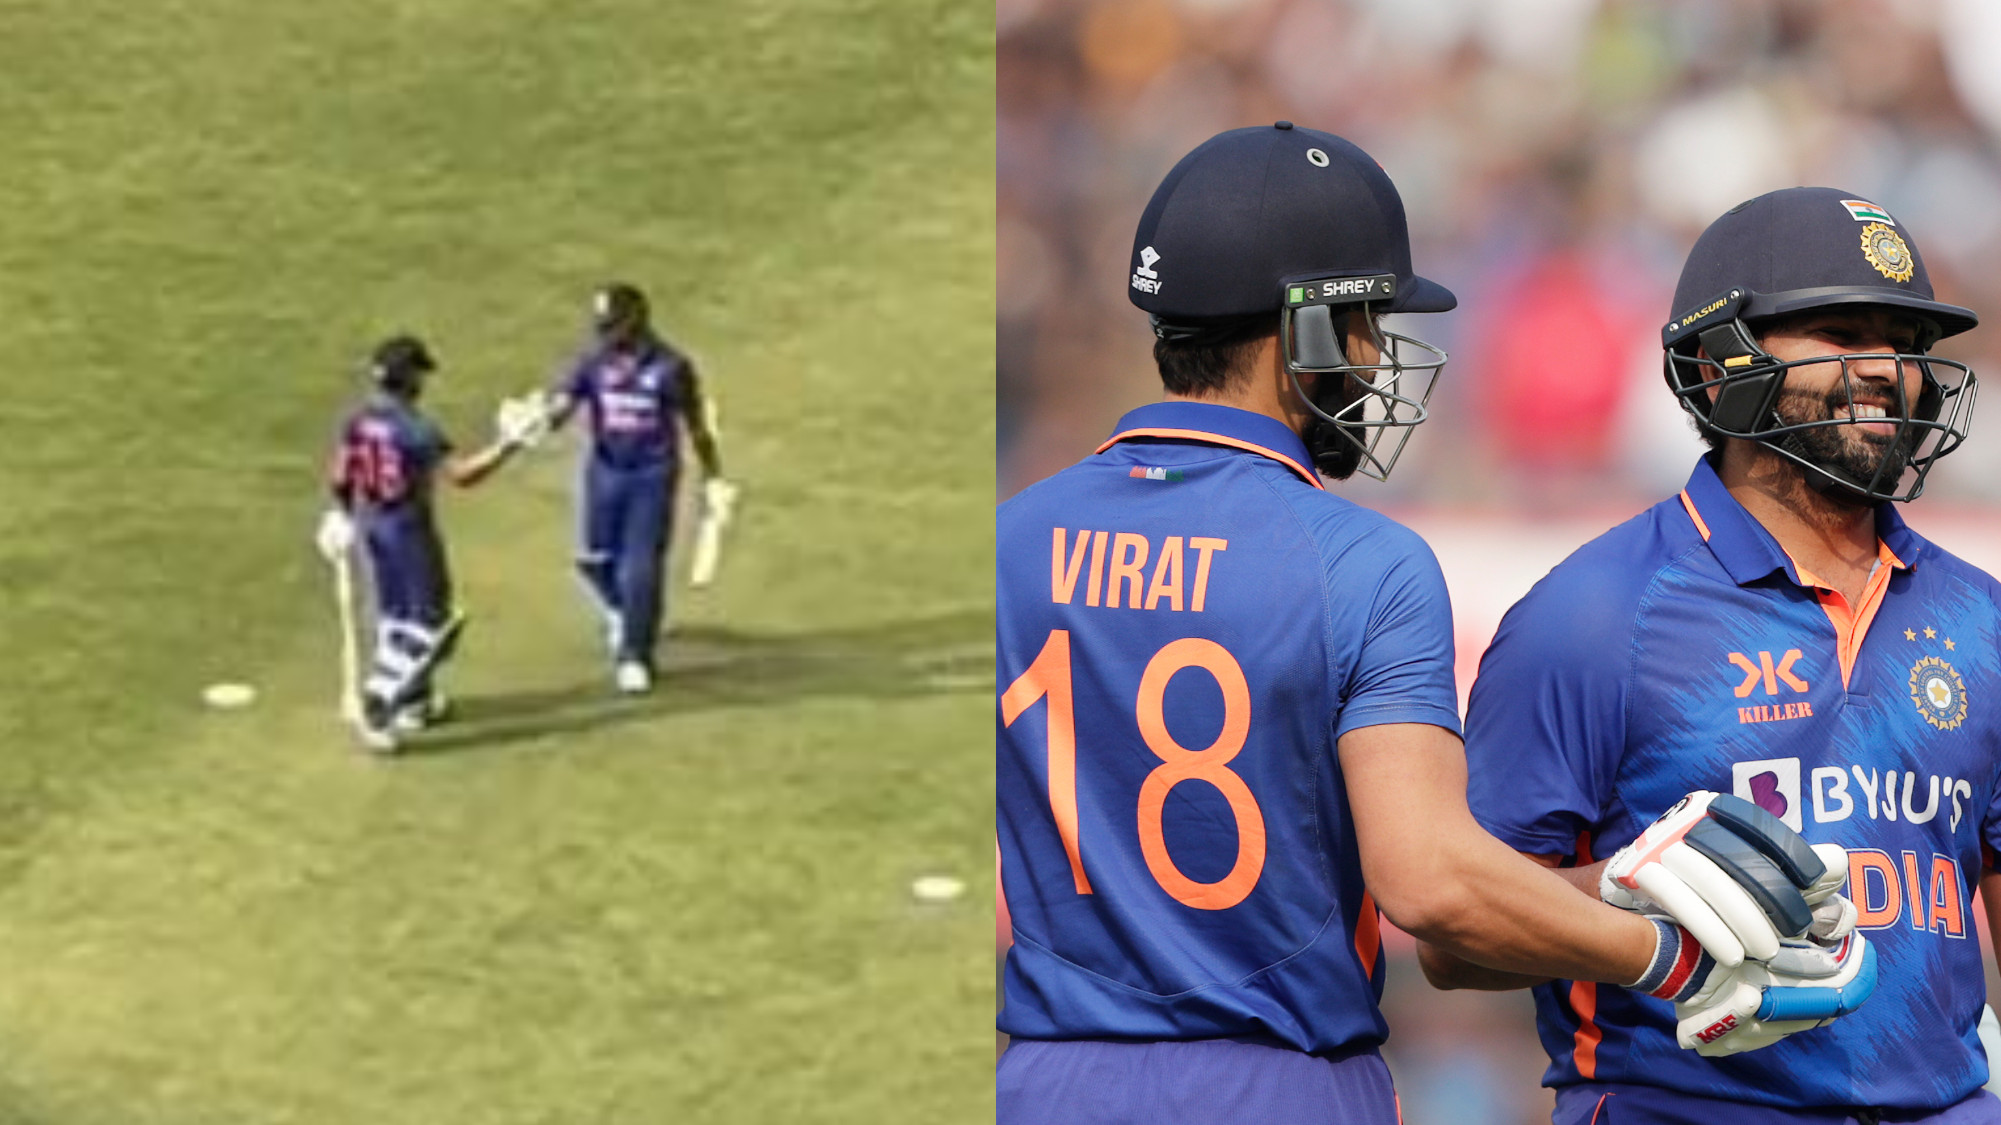 IND v NZ 2023: WATCH- Virat Kohli-Rohit Sharma bromance in middle as India skipper walks off after ton in Indore ODI